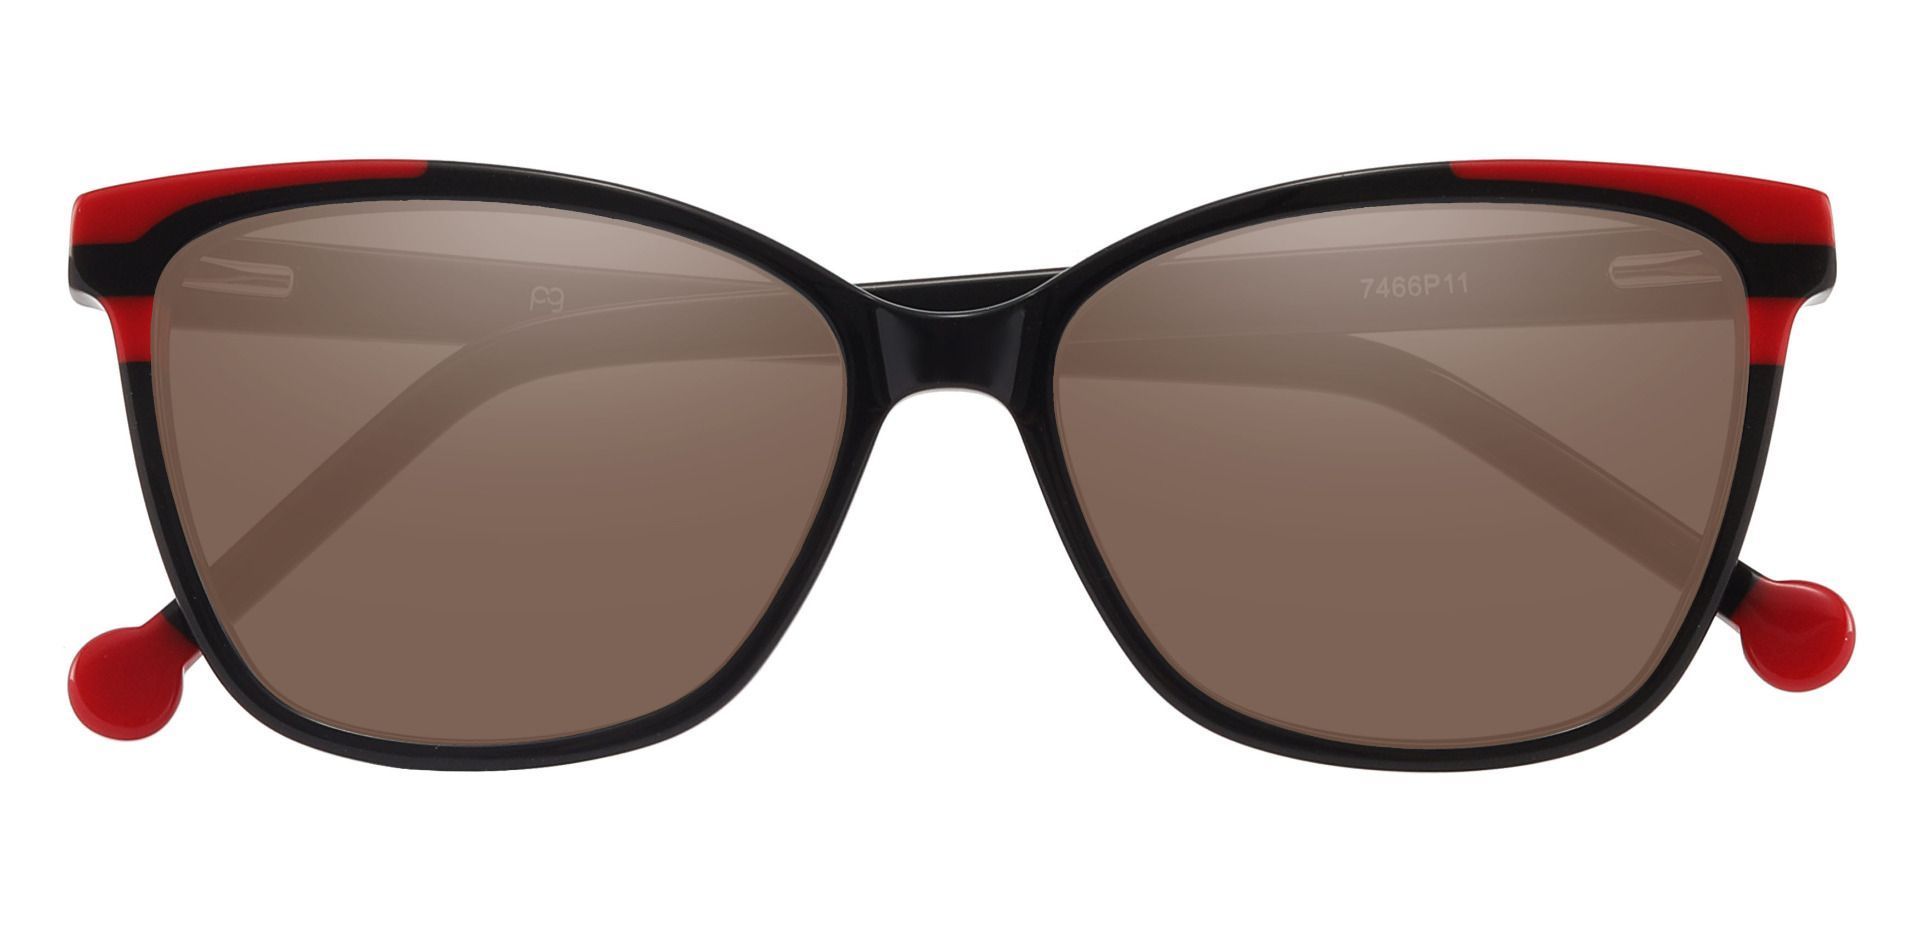 Shania Cat Eye Non-Rx Sunglasses - Black Frame With Brown Lenses